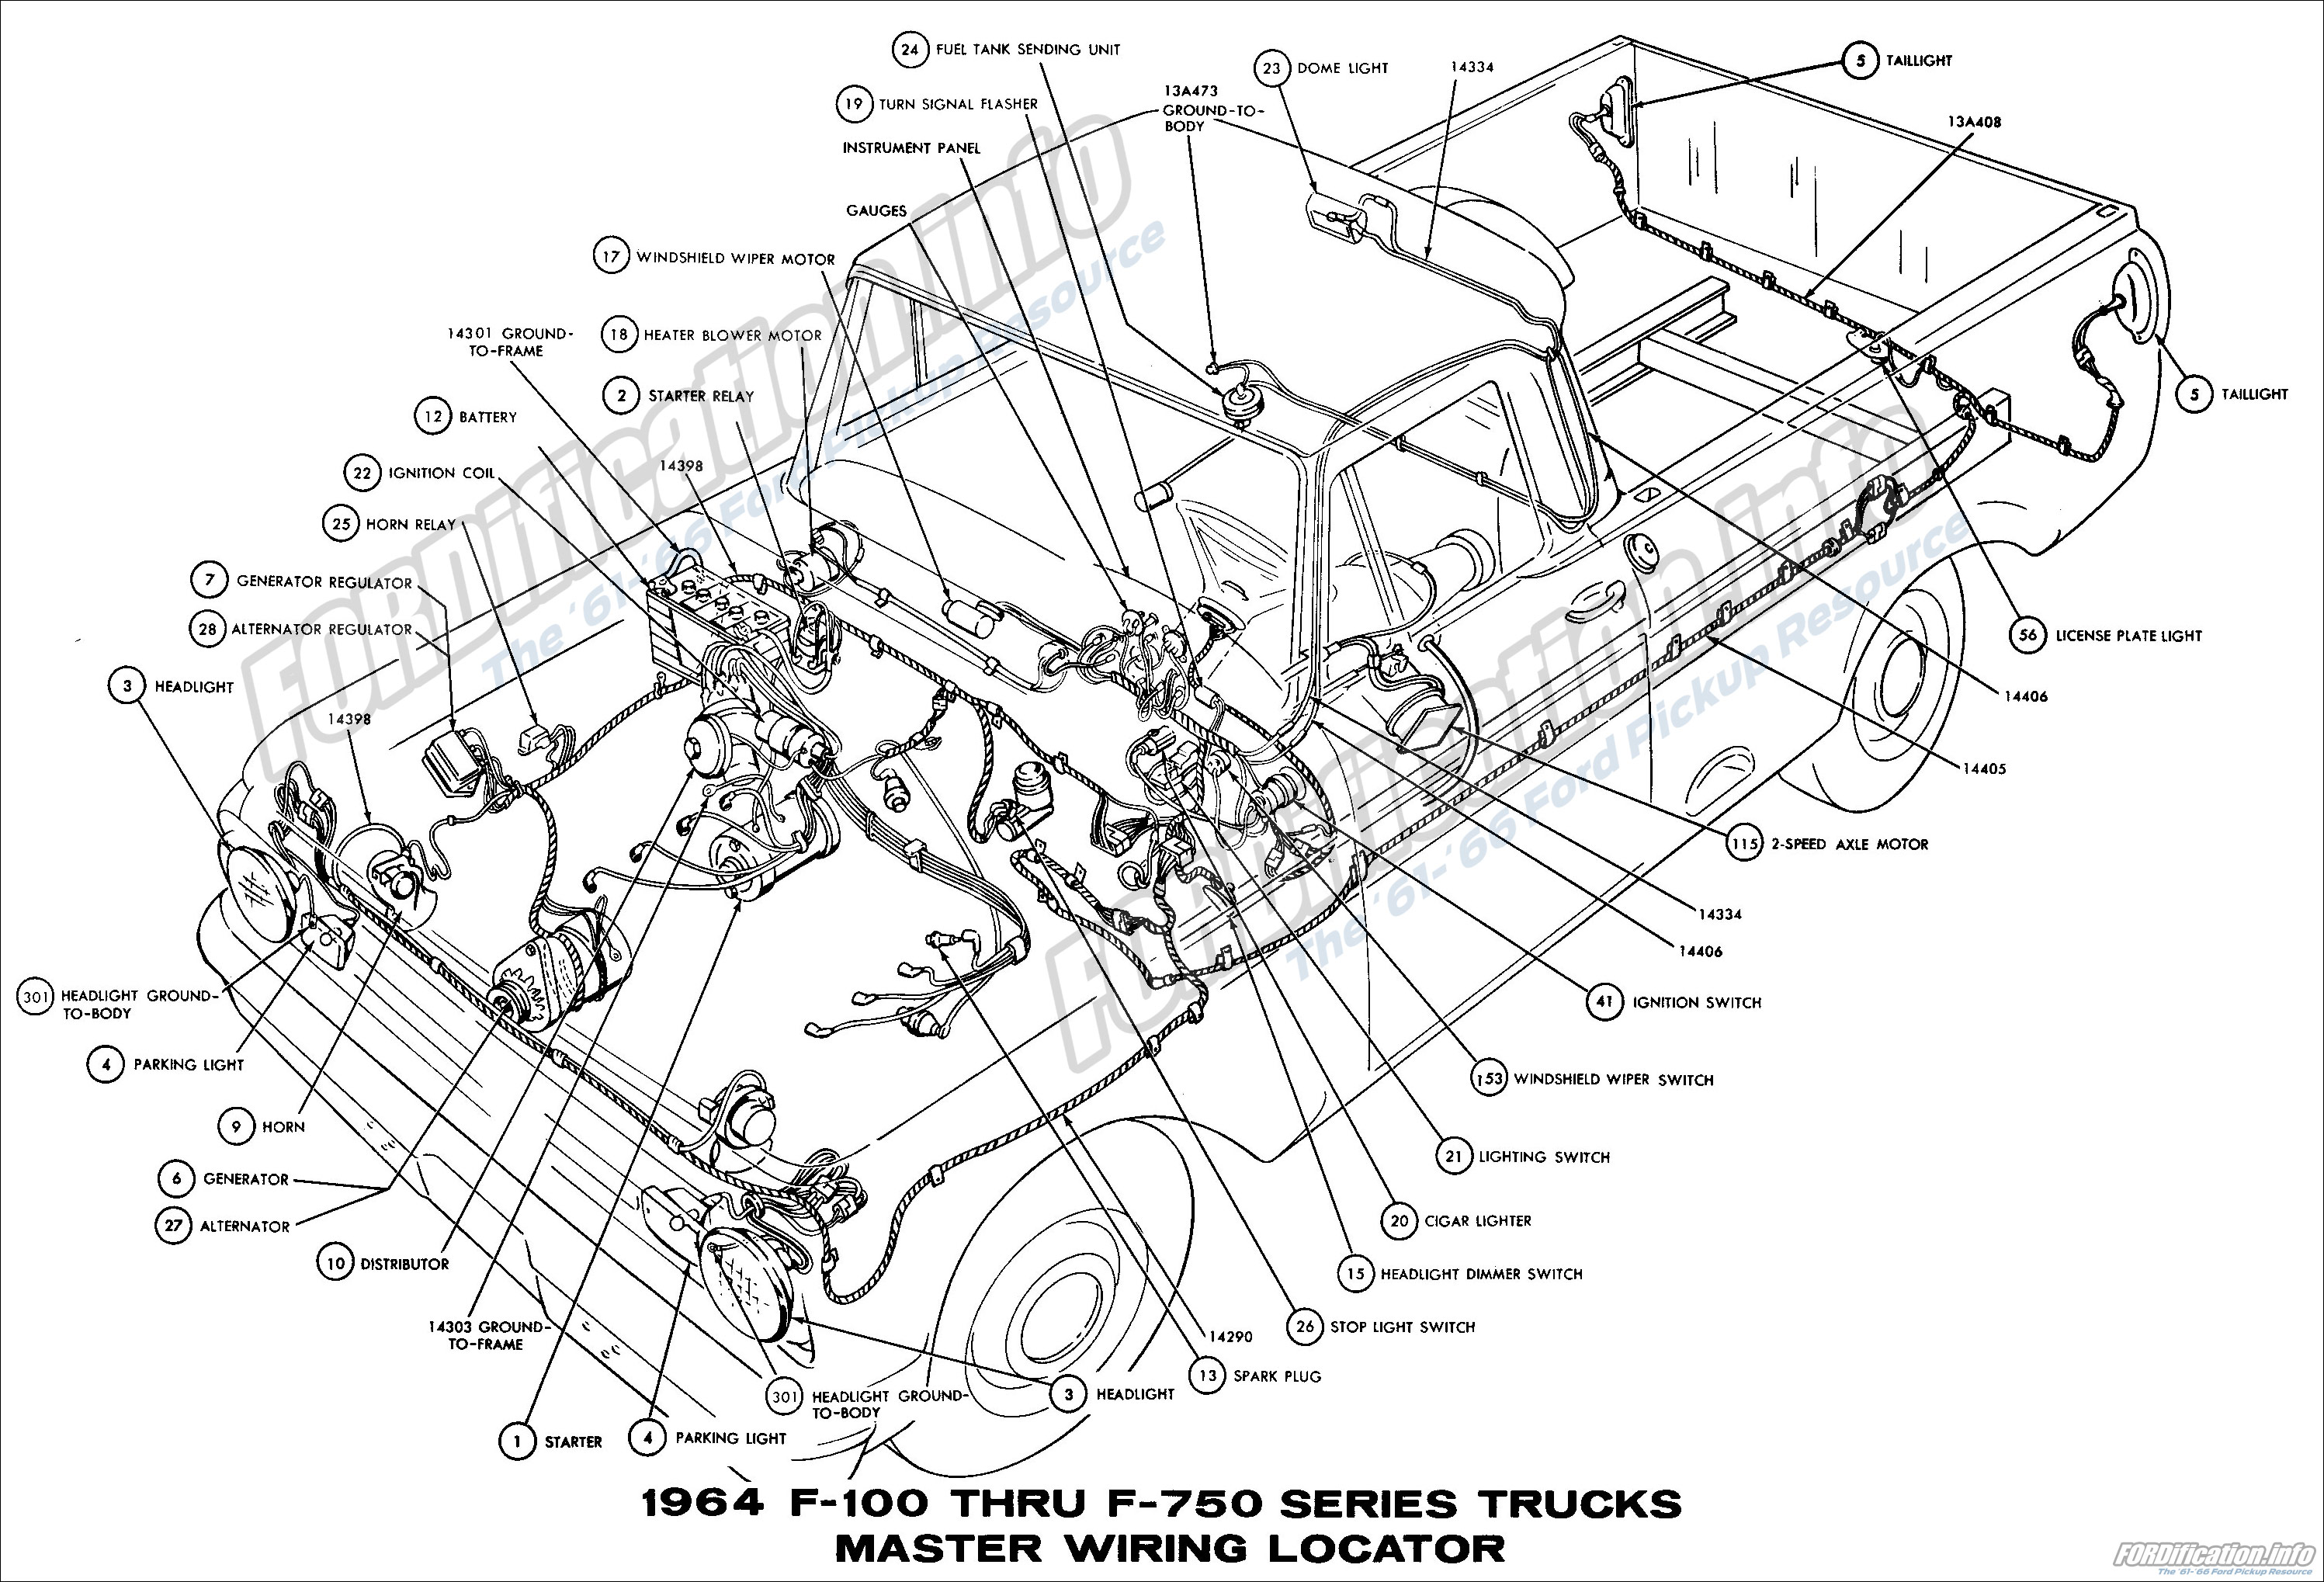 1960 Chevy Truck Wiring Harness Turn Signal Diagram from fordification.info